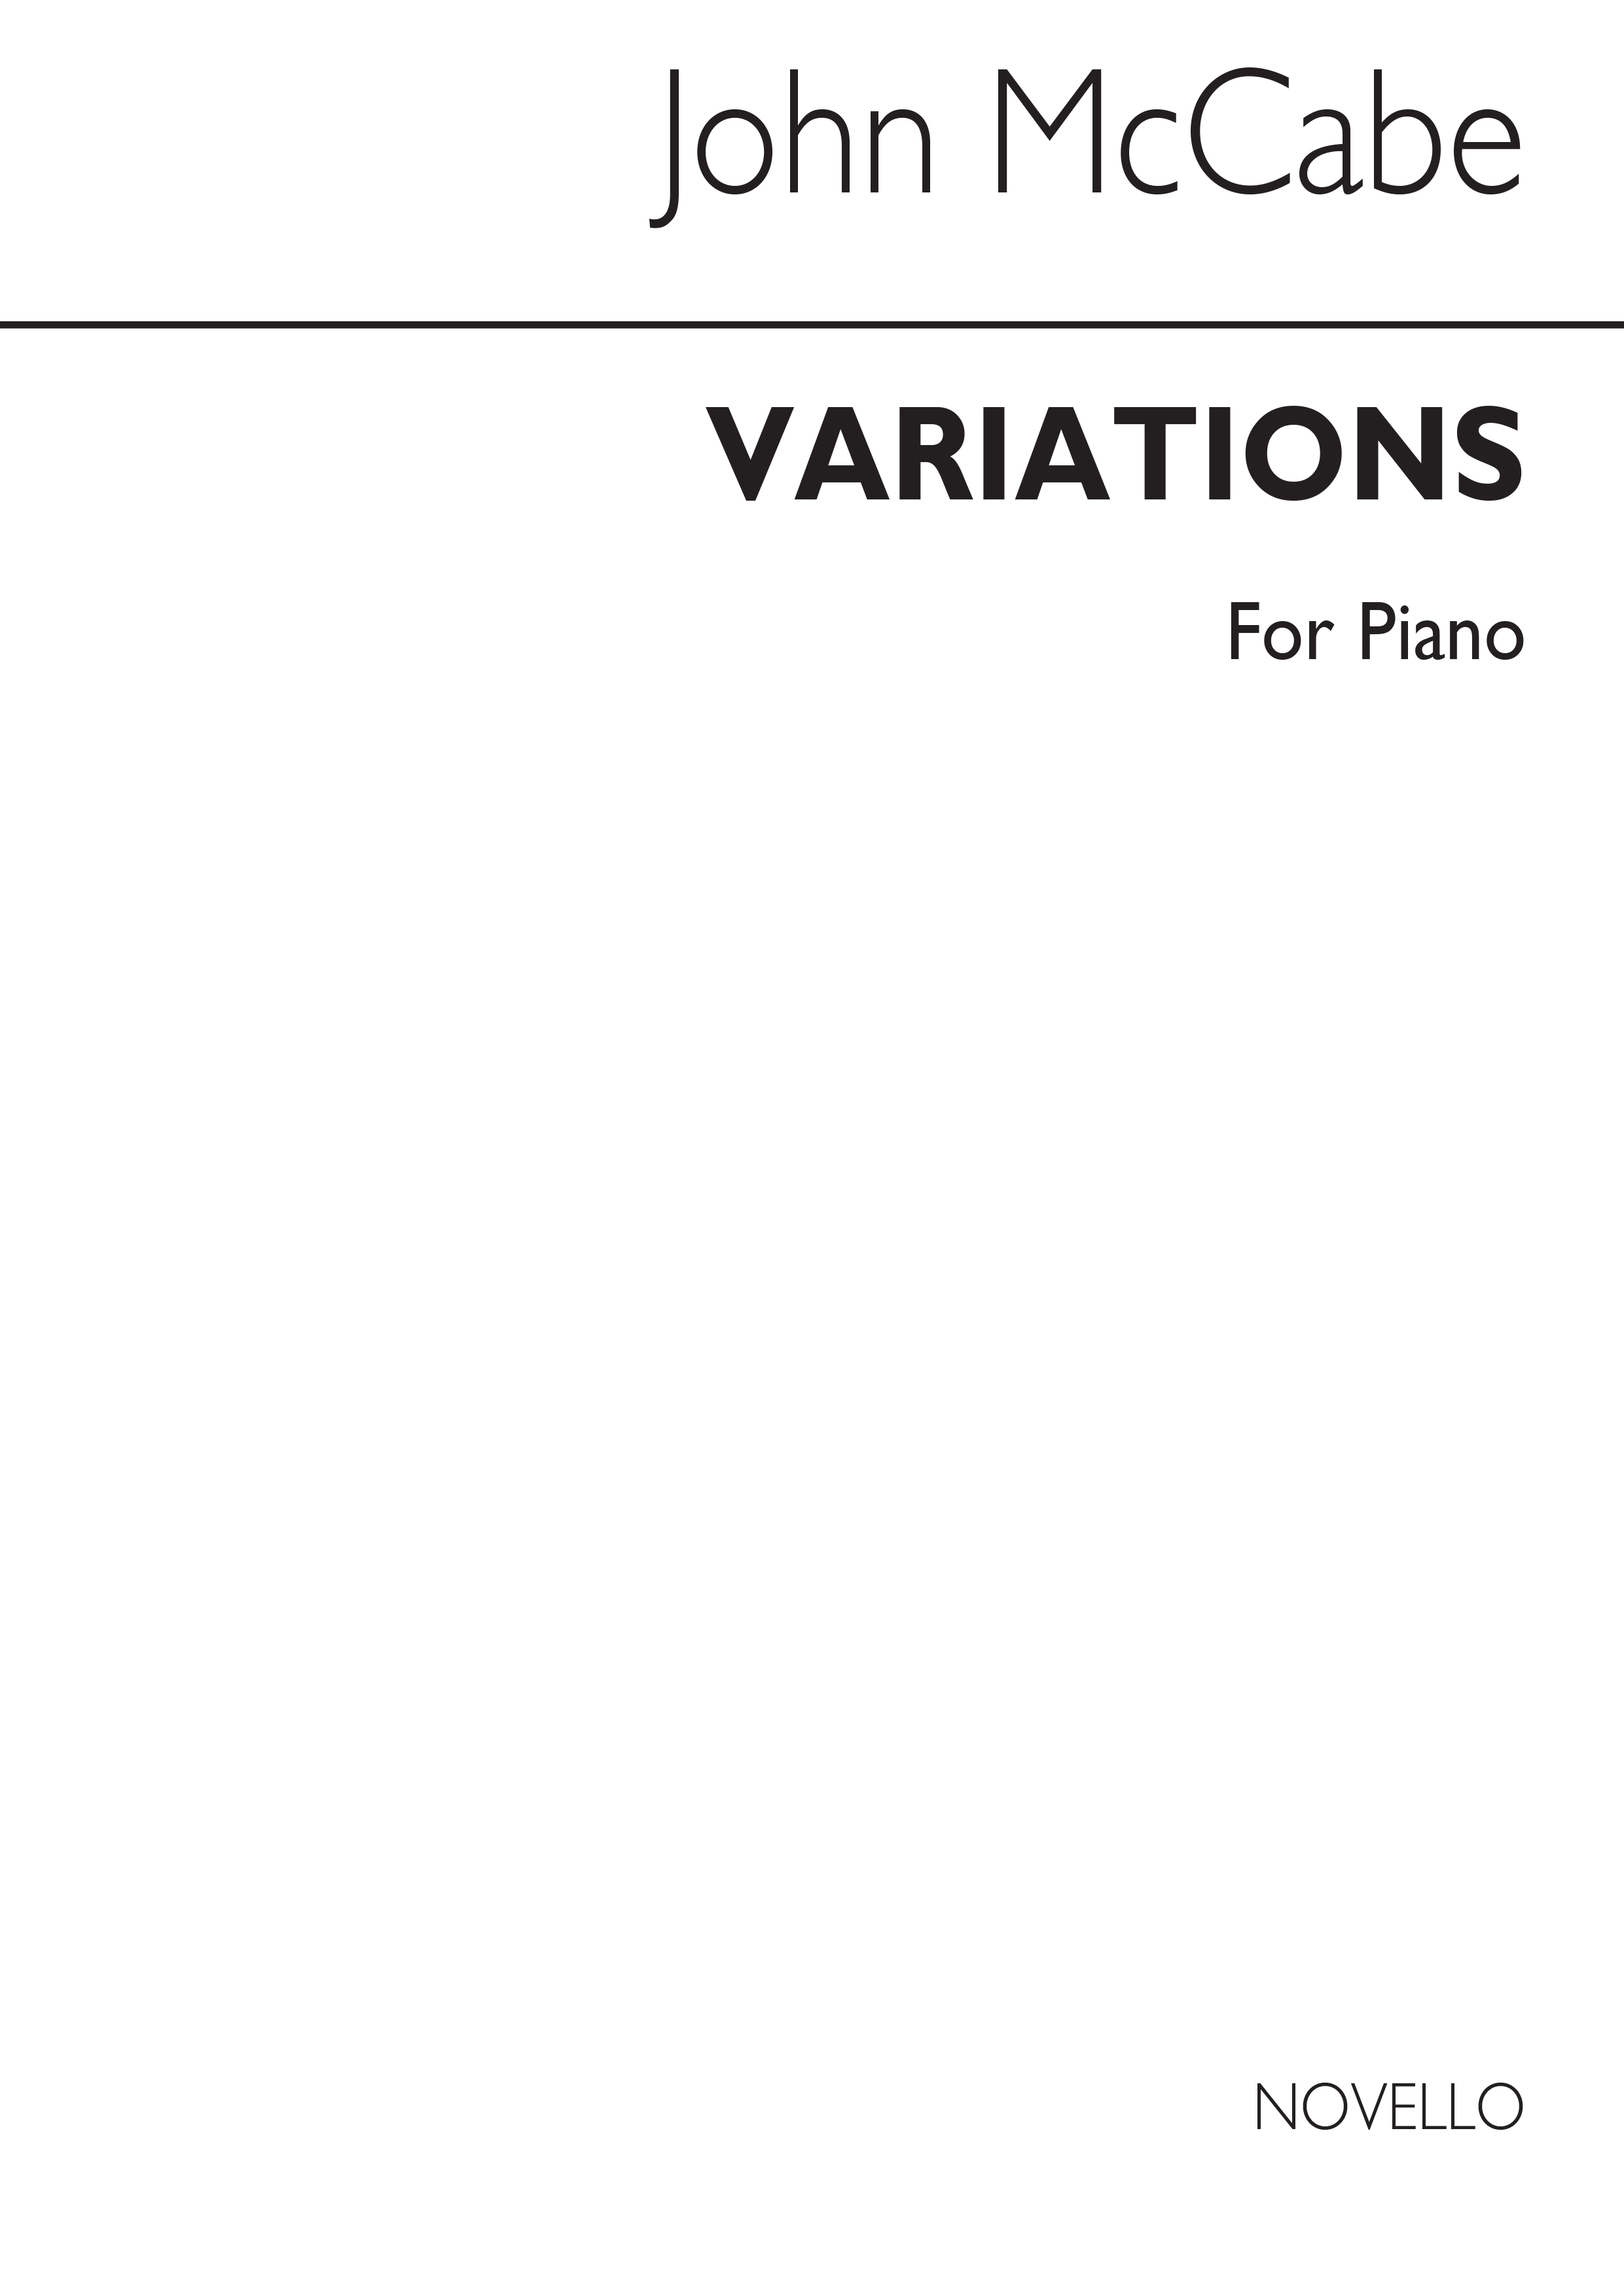 McCabe: Variations For Piano